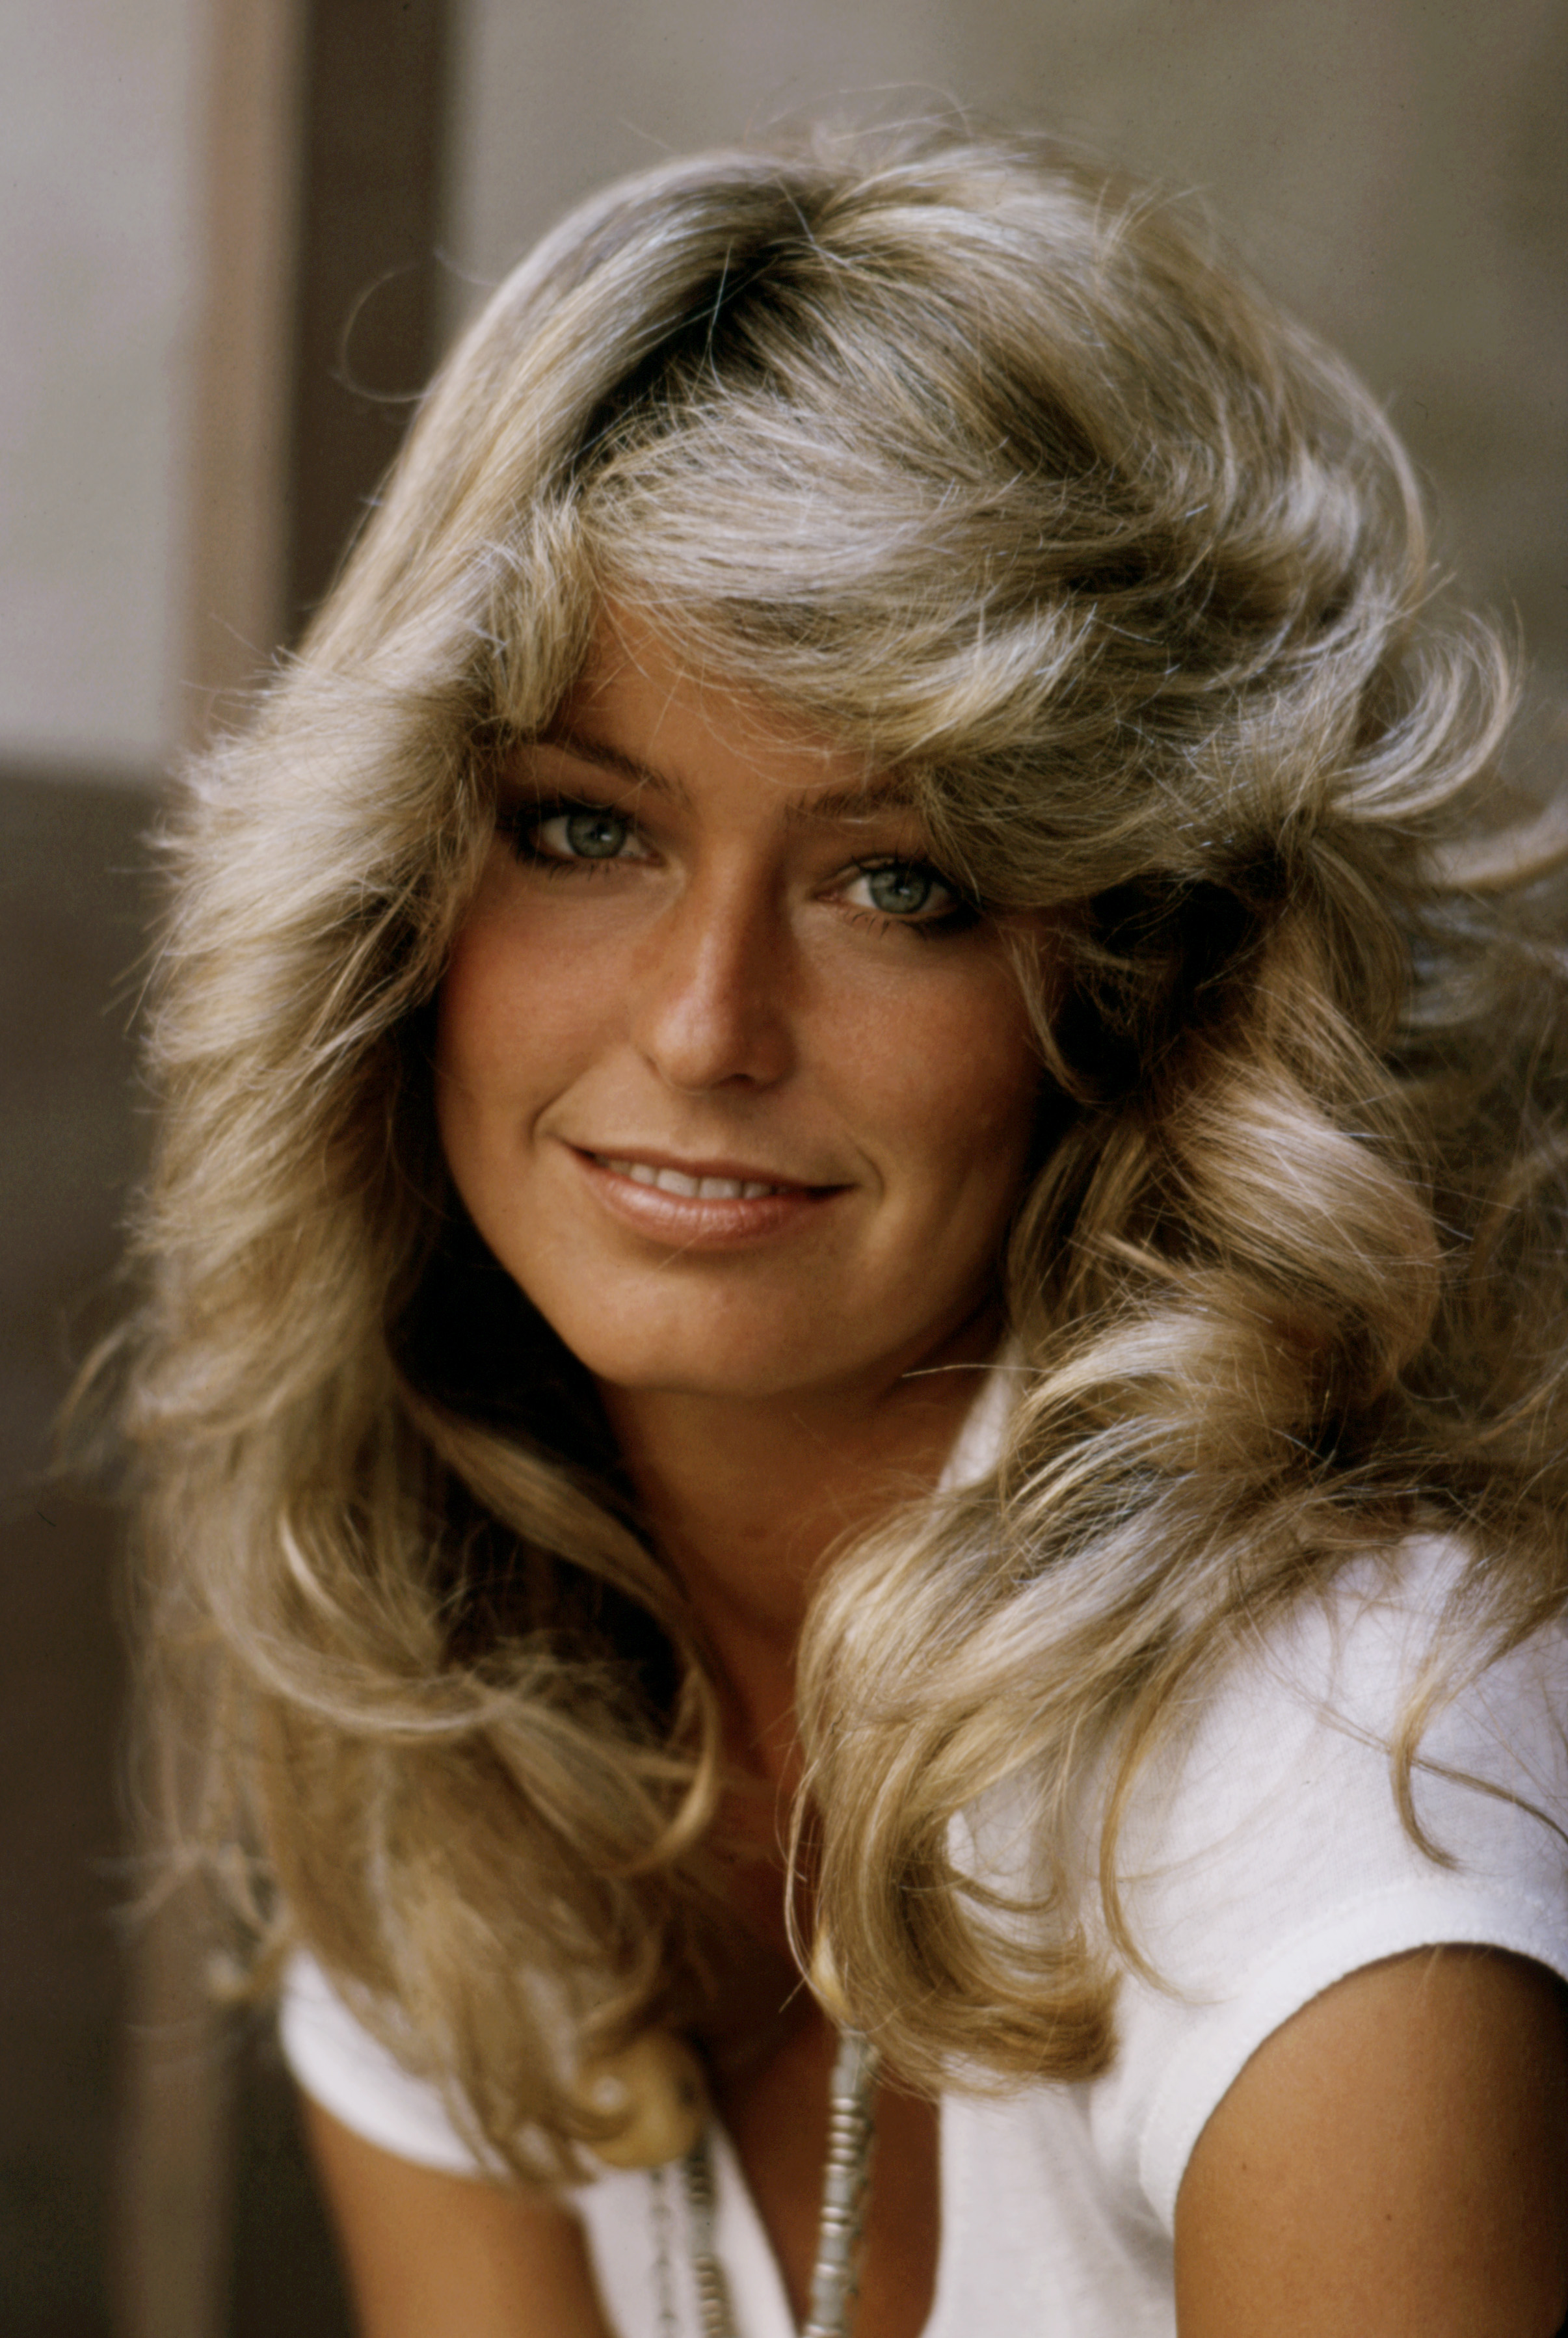 Farrah Fawcett photographed in Los Angeles in 1975 | Source: Getty Images